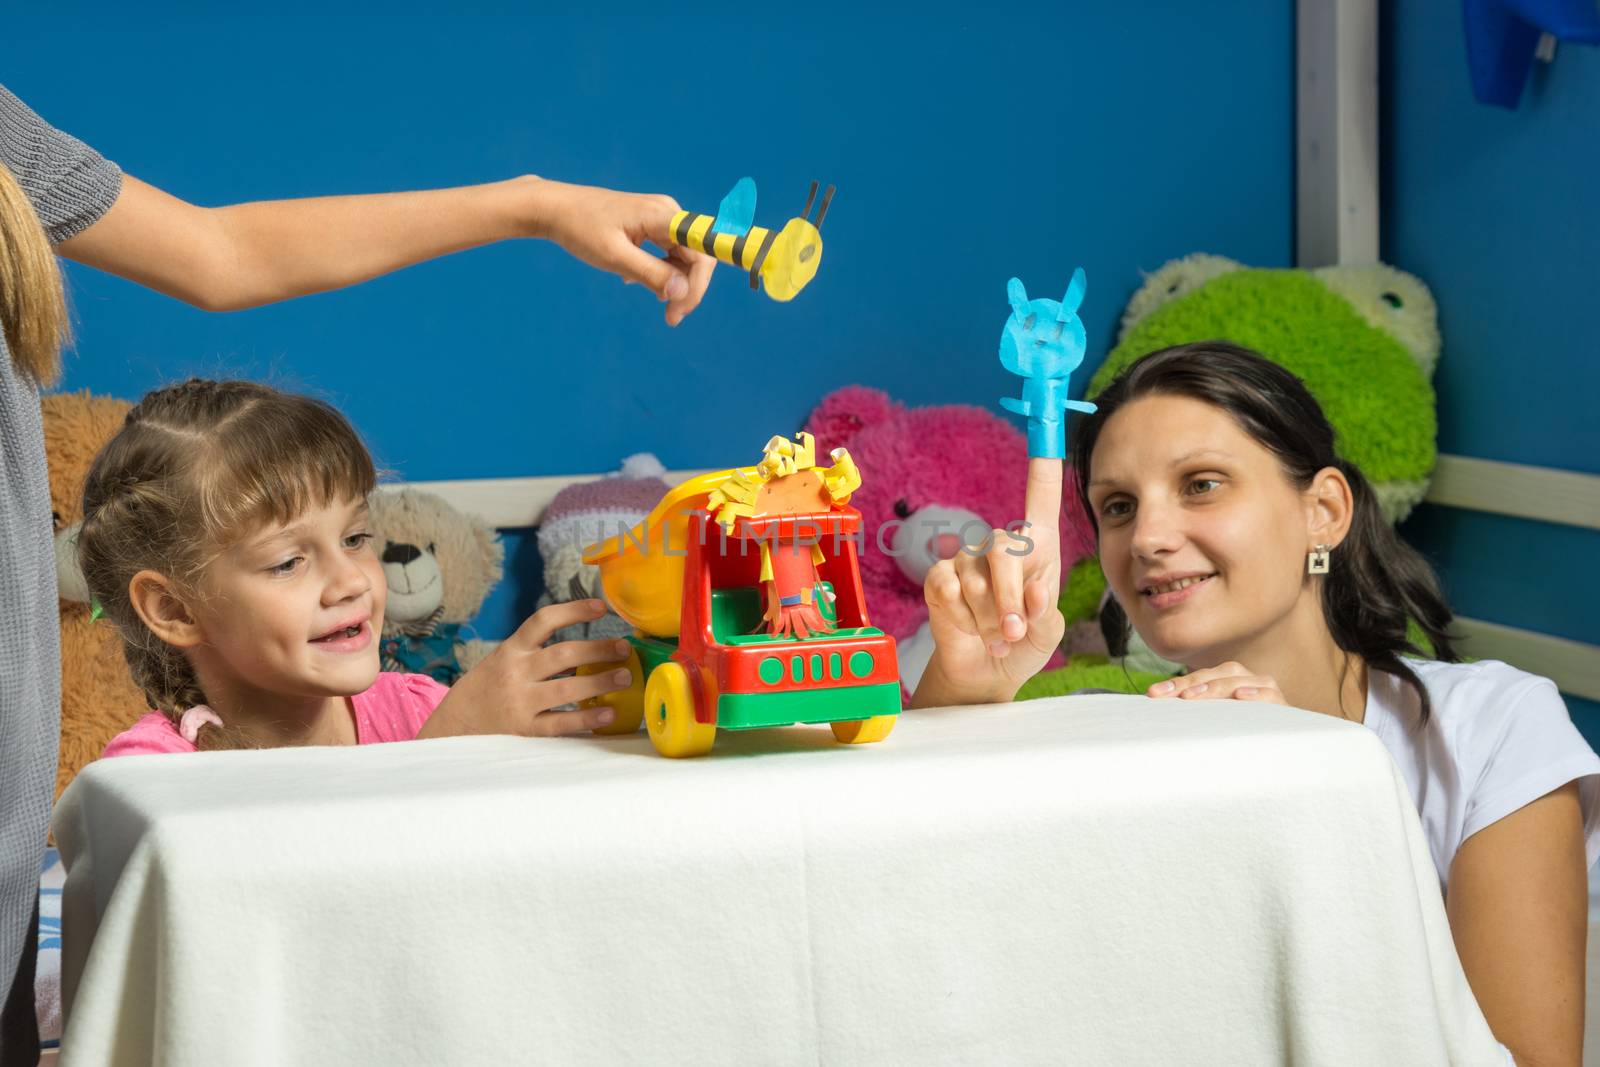 An enthusiastic mother plays with daughters in a self-made finger puppet theater by Madhourse